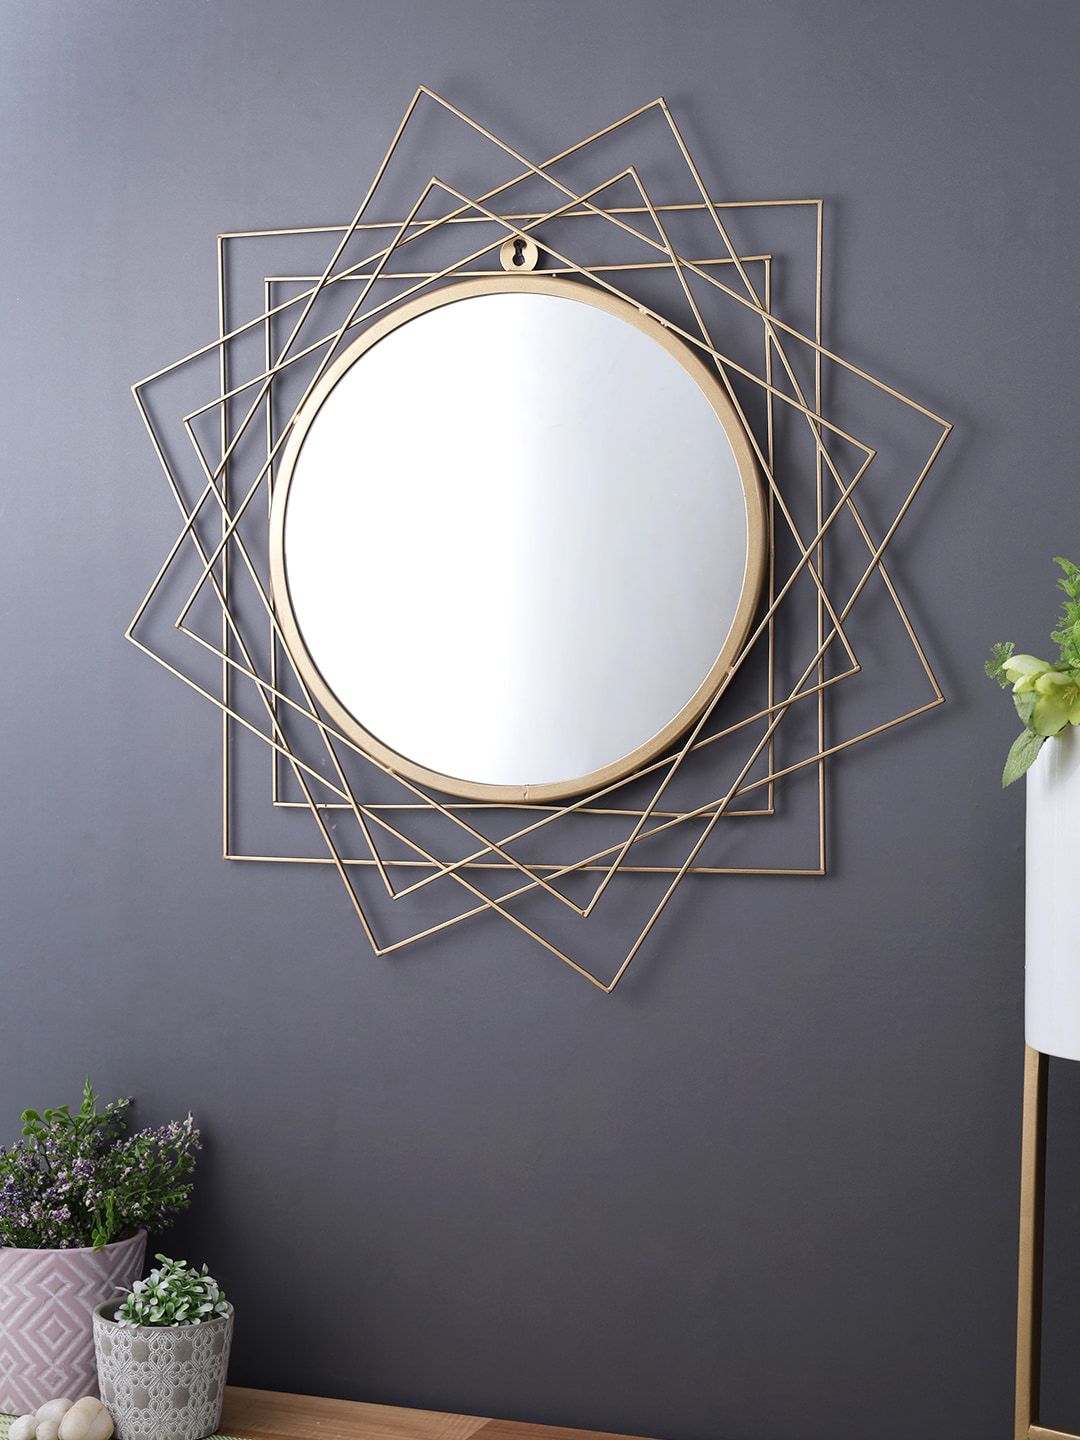 Aapno Rajasthan Gold-Toned Handcrafted Metallic Frame Wall Mirror Price in India